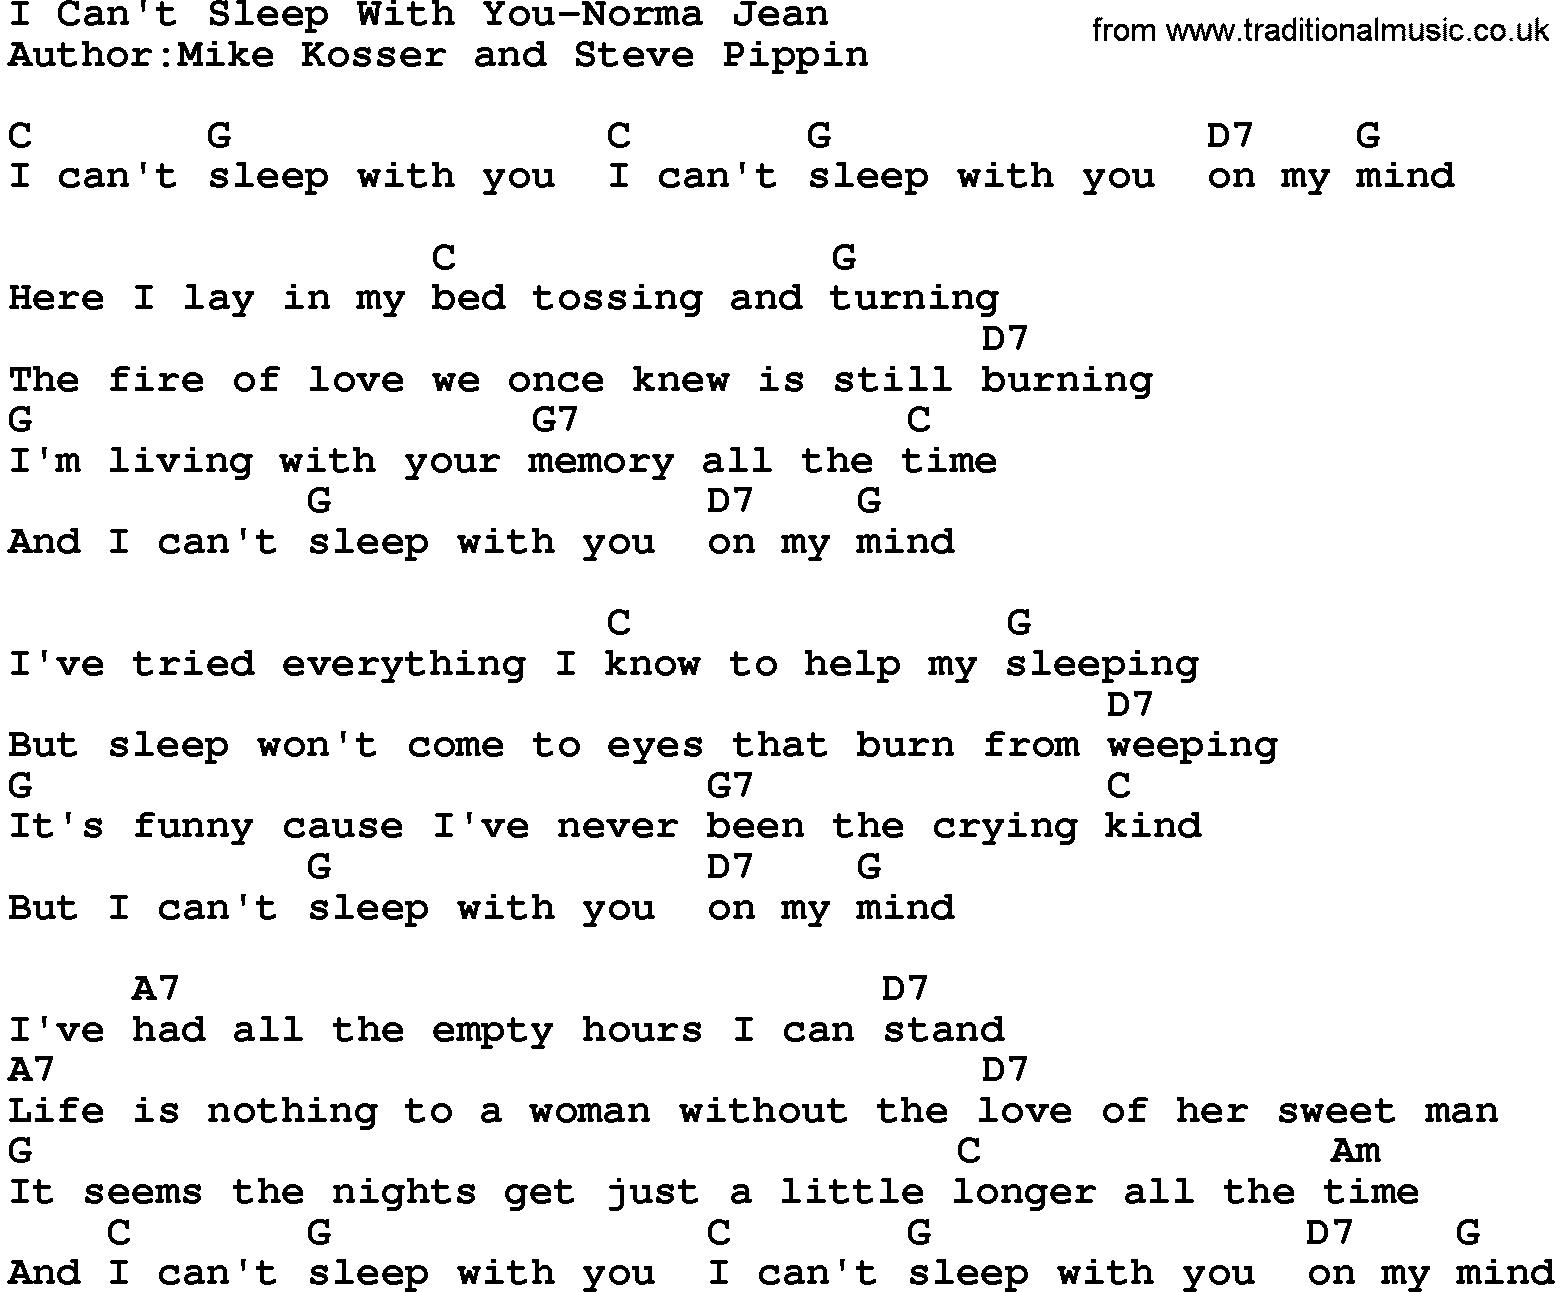 Country music song: I Can't Sleep With You-Norma Jean lyrics and chords